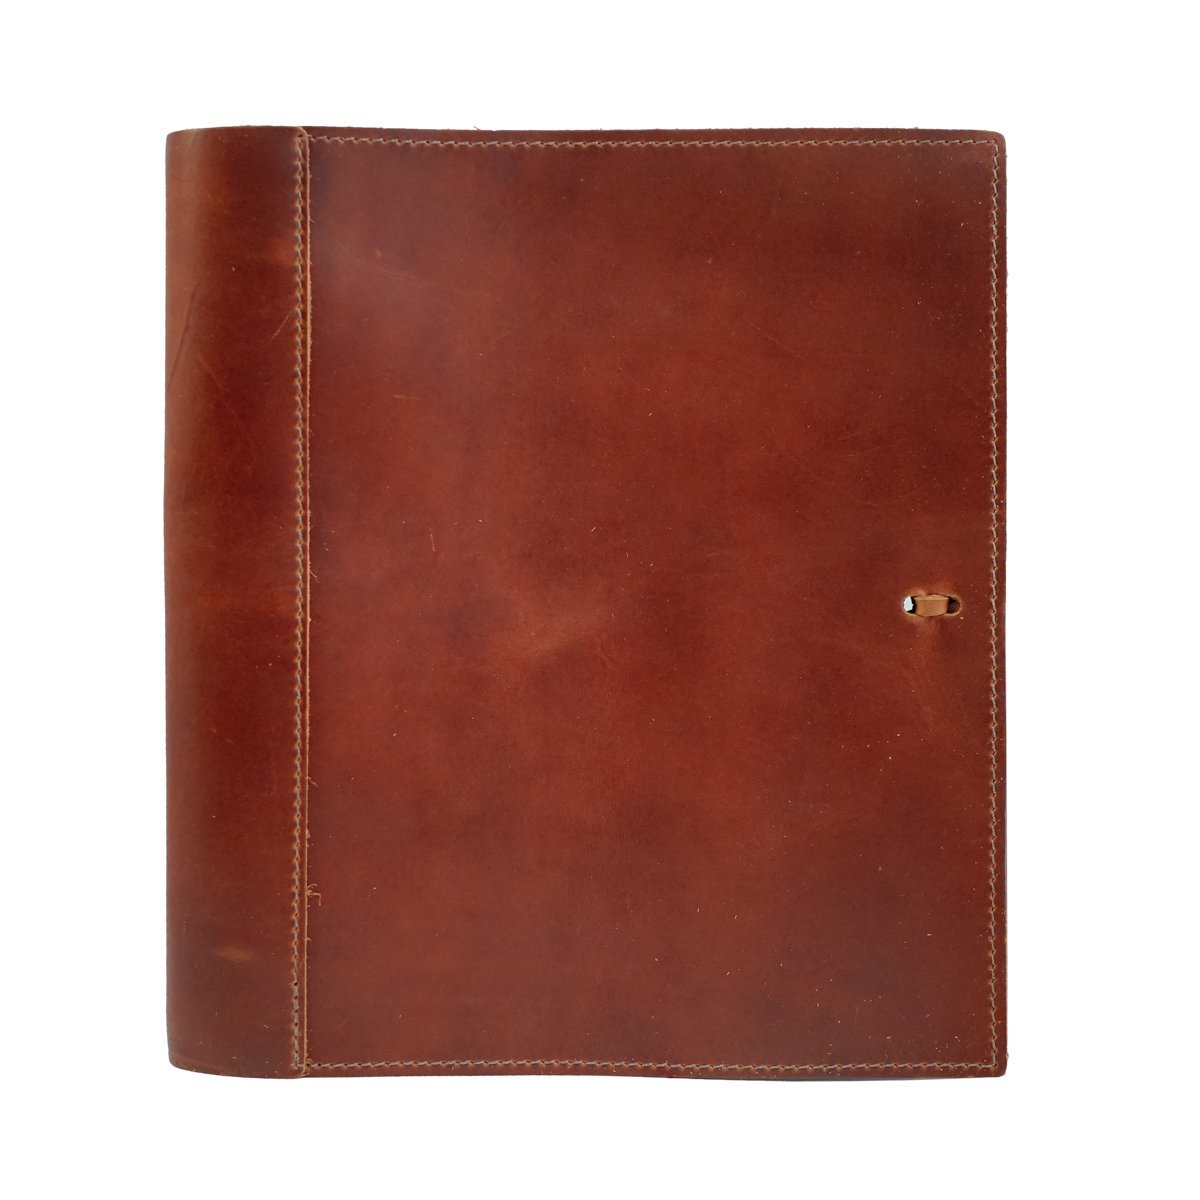 Soft Leather Binder 3 Ring  Leather Binder Personalized – Rustico